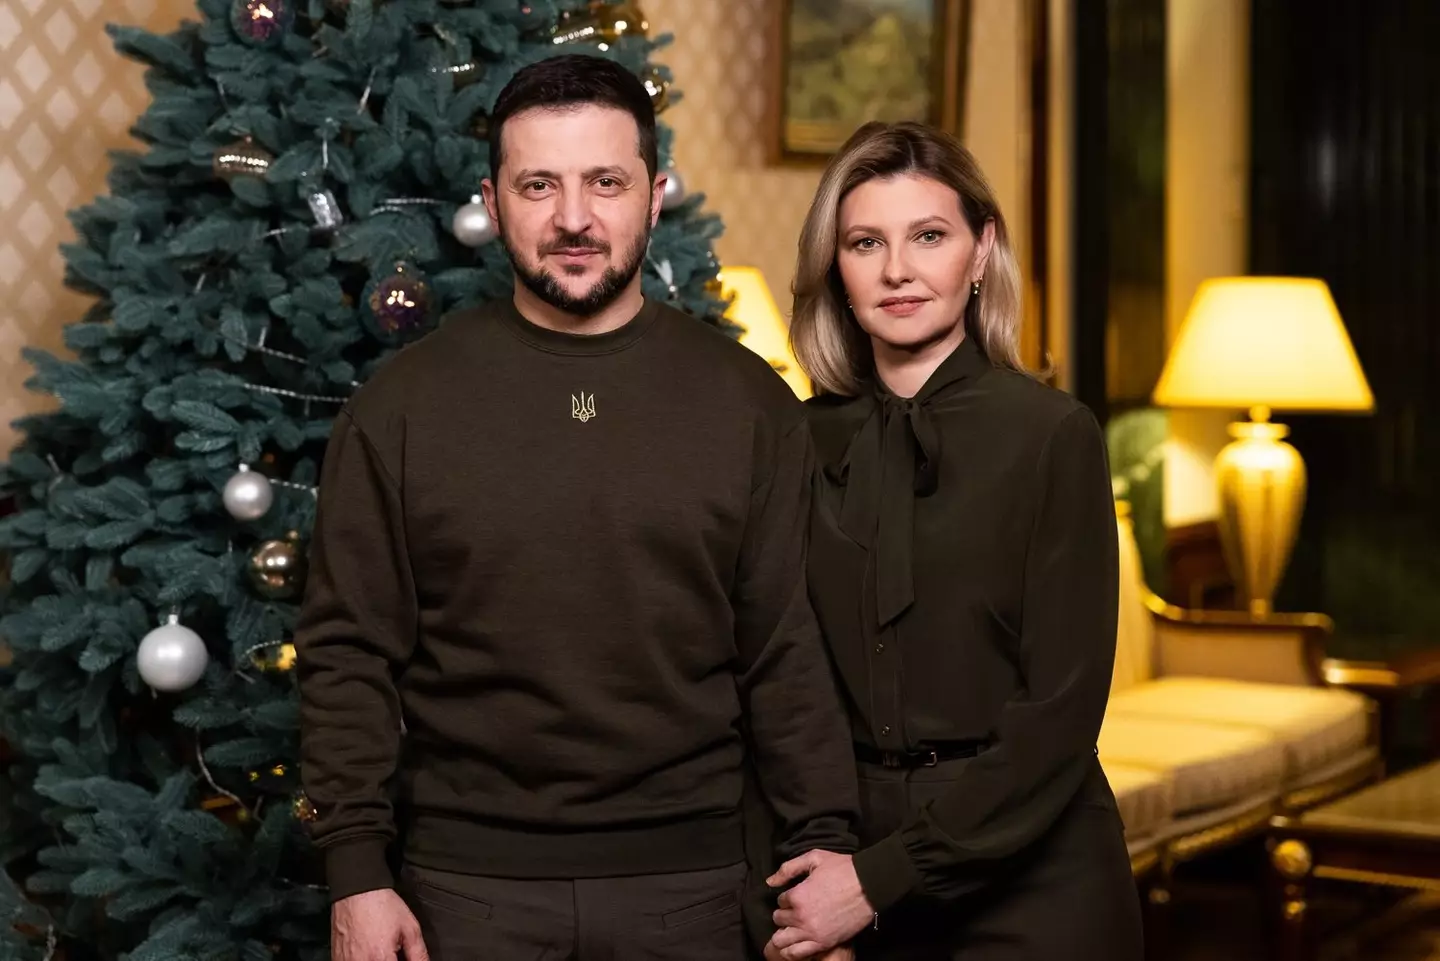 President Volodymyr Zelenskyy delivered his own New Year's message.